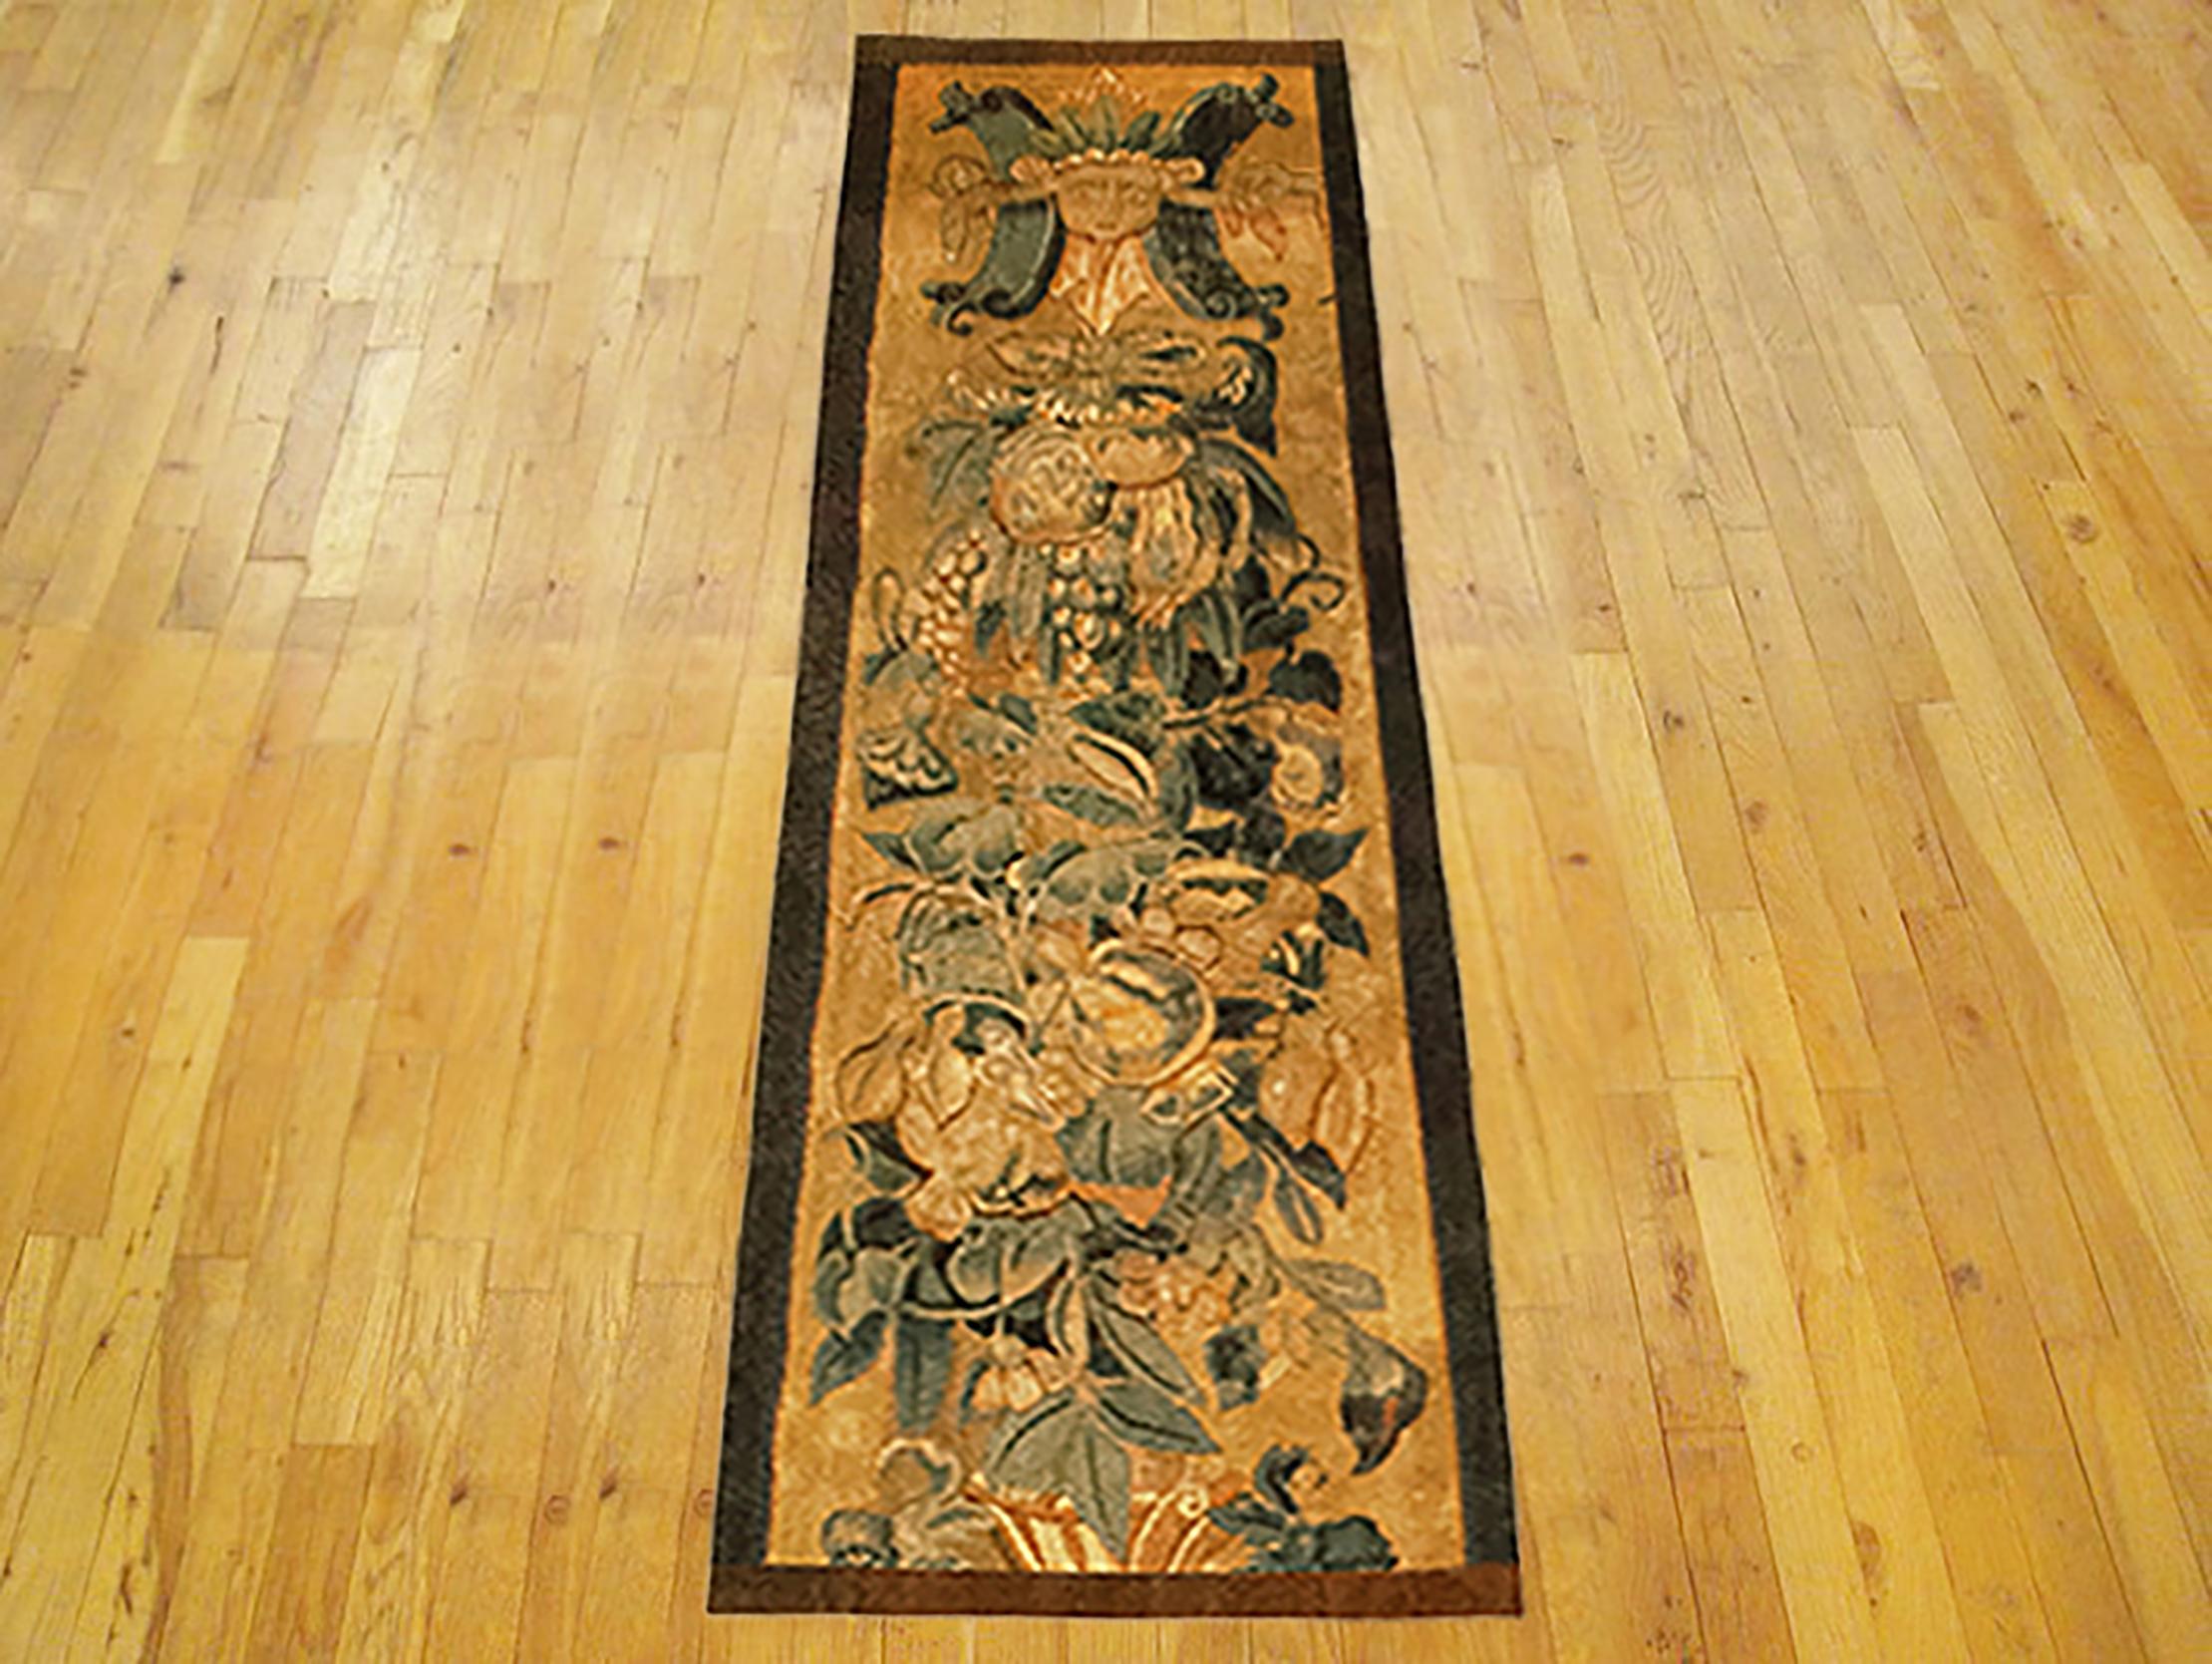 A 16th century Brussels Historical Tapestry panel. This vertically oriented decorative tapestry panel depicts a scrolling foliate design, with a grotesque and a coat of arms at top, and with ribbon ties and acanthus leaves below. The central area is